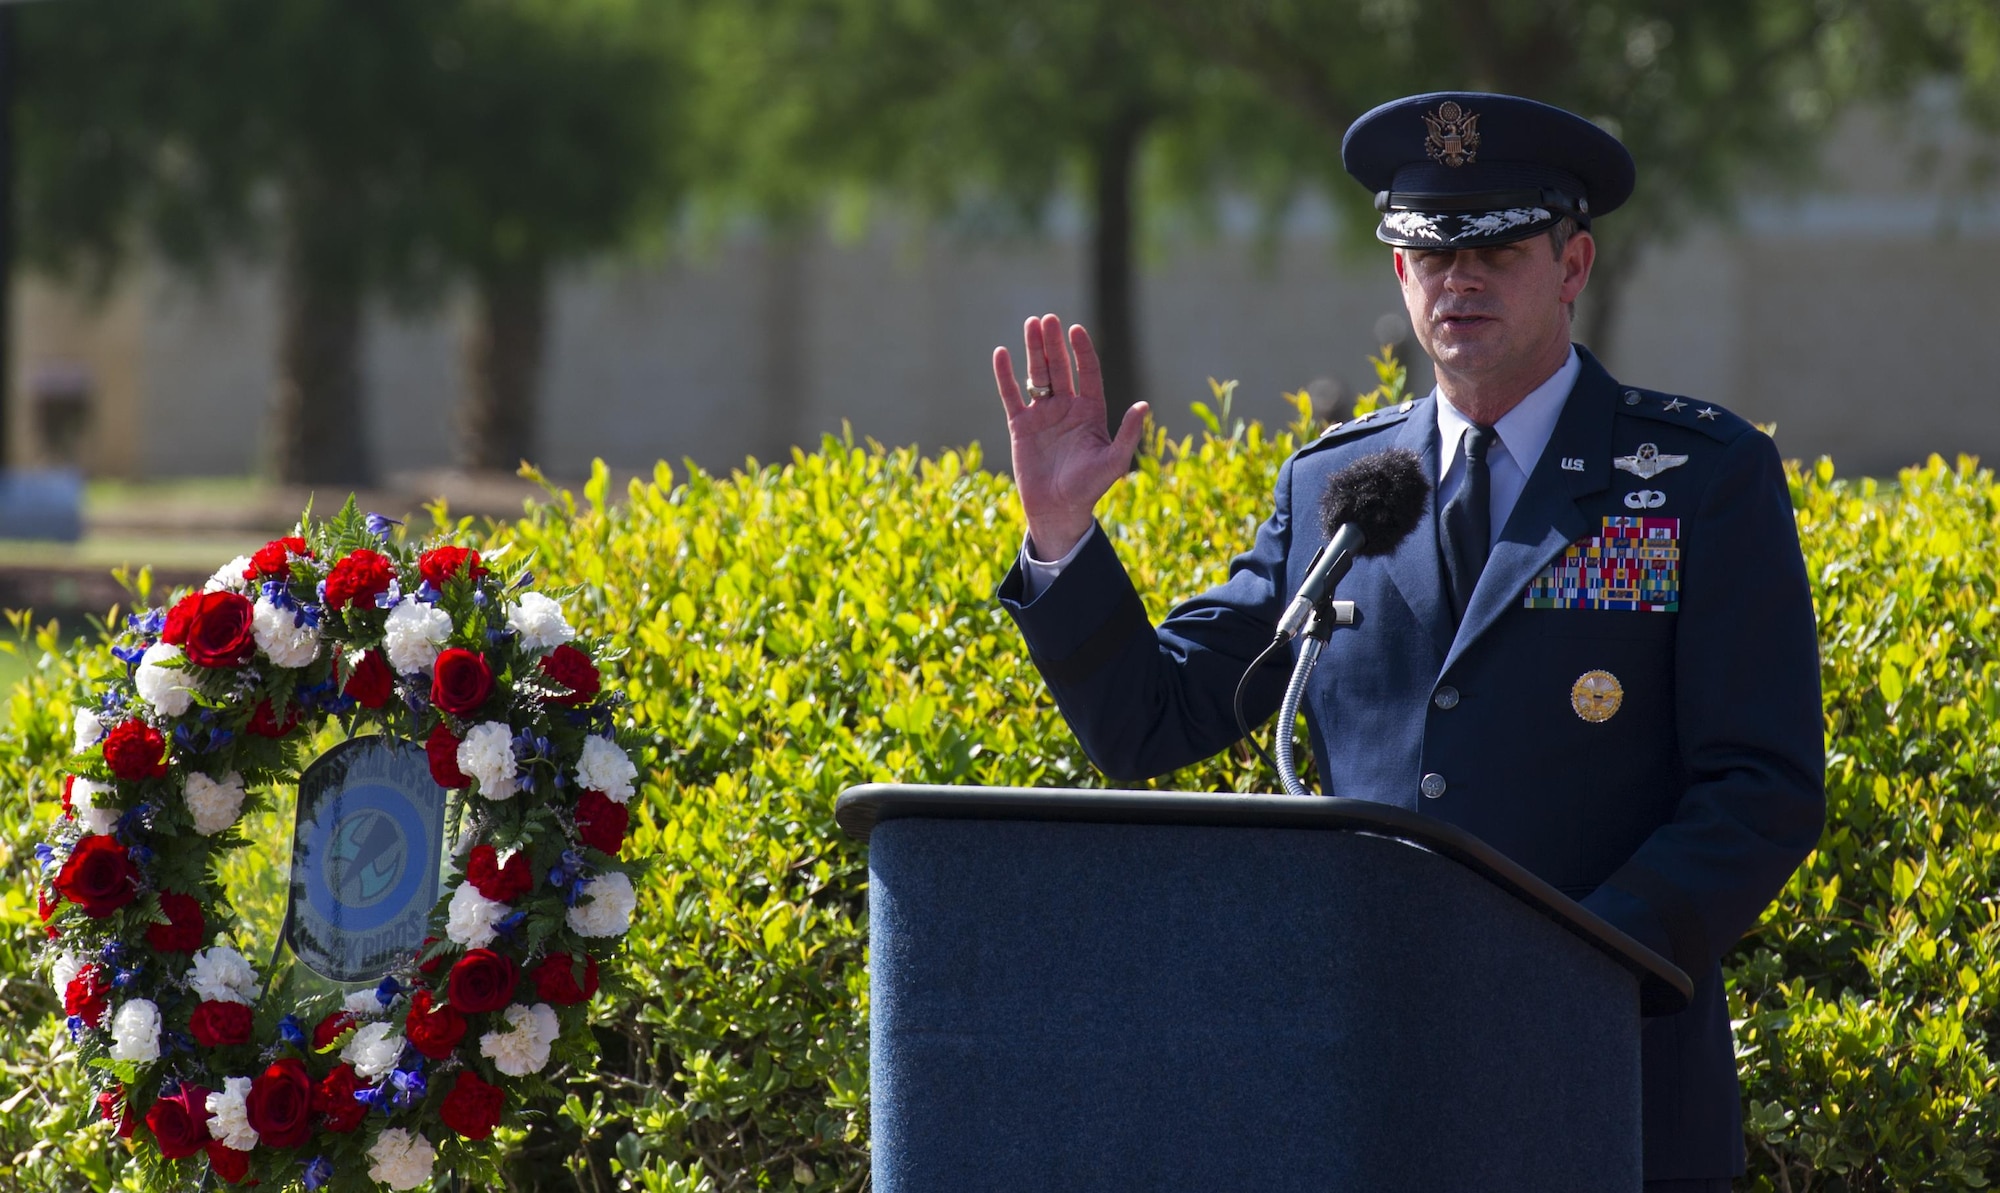 Maj. Gen. Mike Plehn, vice commander of Air Force Special Operations Command, speaks during the Operation Eagle Claw memorial ceremony at Hurlburt Field, Fla., June 23, 2017. Operation Eagle Claw was an attempted rescue mission on April 24, 1980, into Iran to liberate more than 50 American hostages captured after a group of radicals took over the American embassy in Tehran, Nov. 4, 1979. The mission resulted in the deaths of eight U.S. service members at a remote site deep in Iranian territory known as Desert One. (U.S. Air Force photo by Airman 1st Class Joseph Pick)